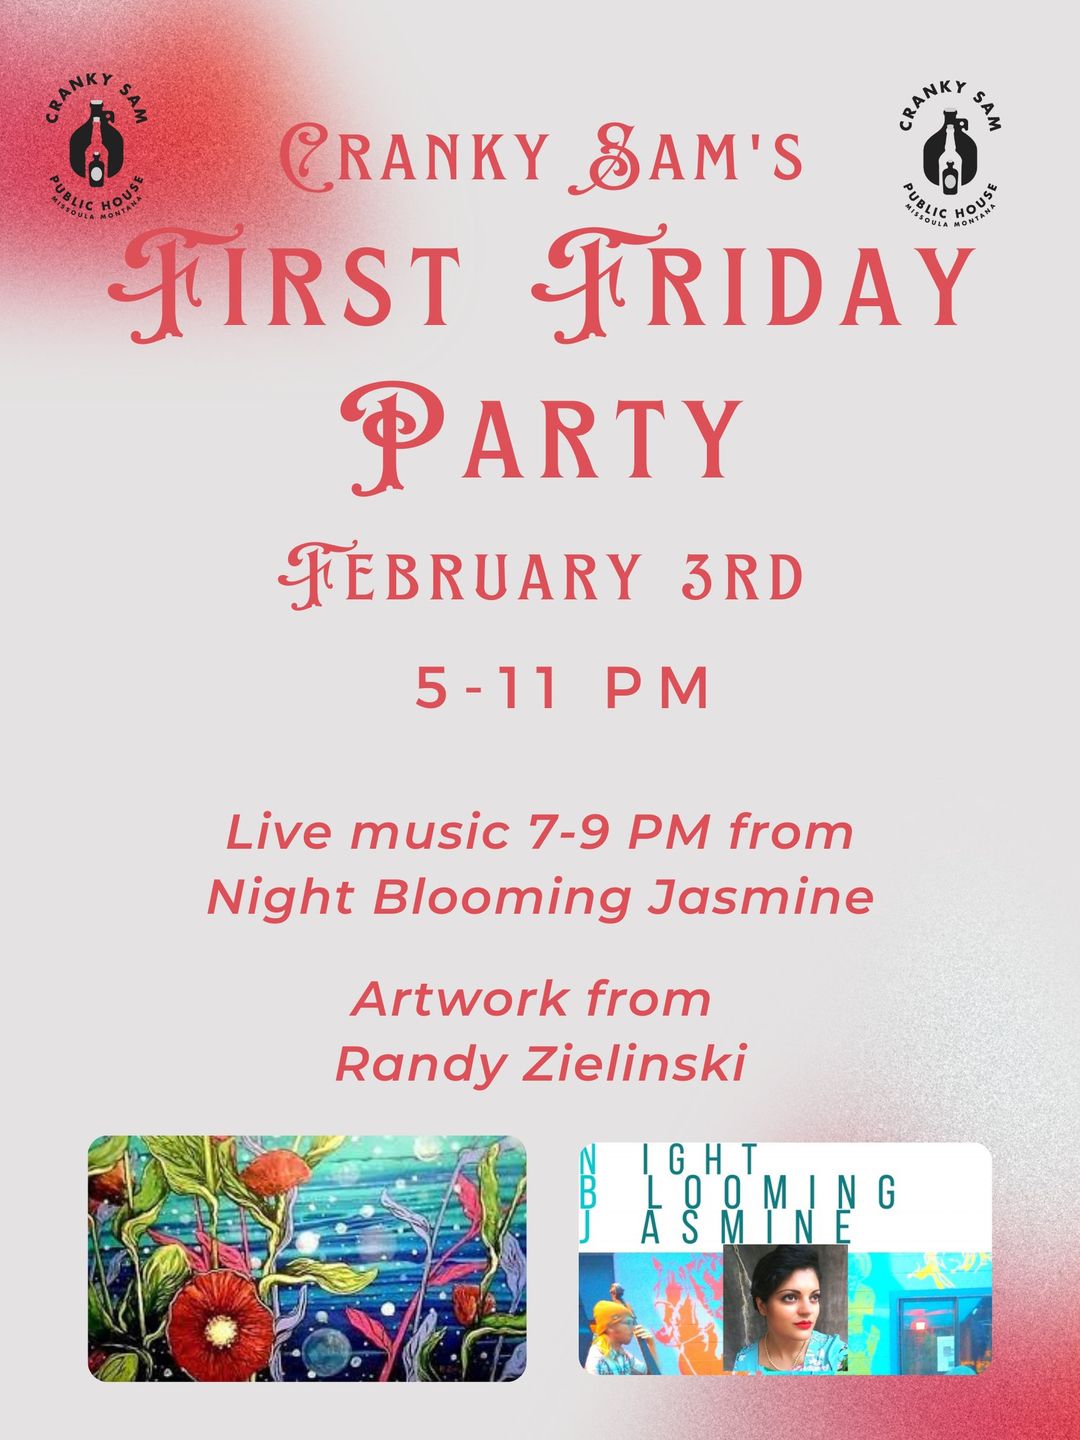 First Friday Party, Feat. Night Blooming Jasmine